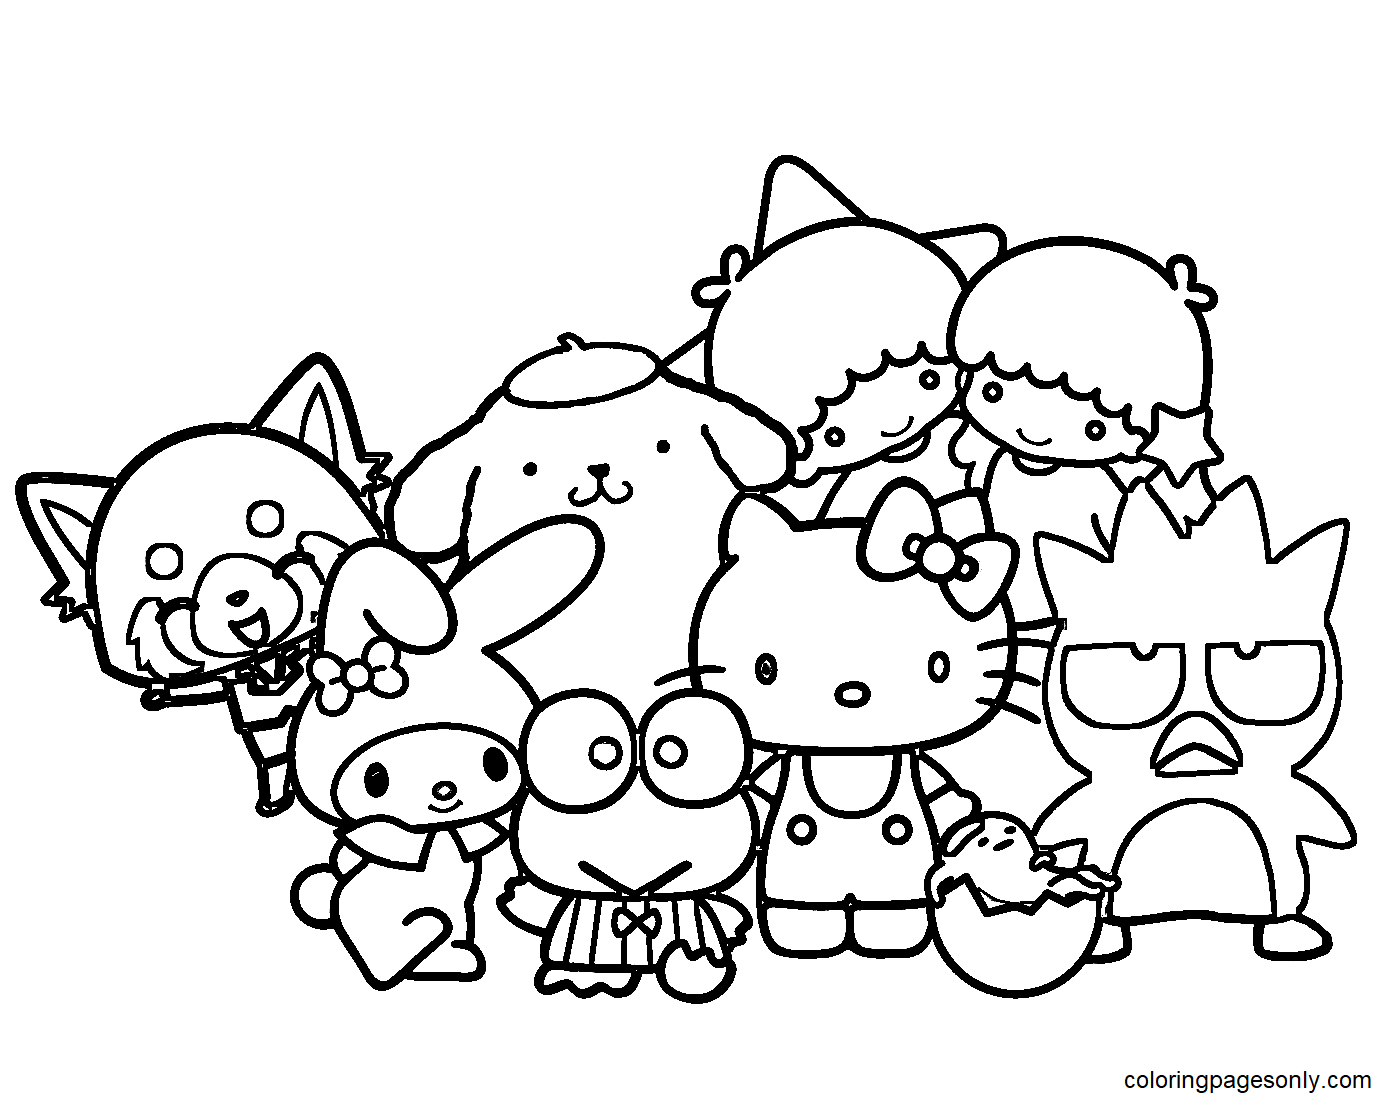 Sanrio Characters Coloring Pages Printable for Free Download